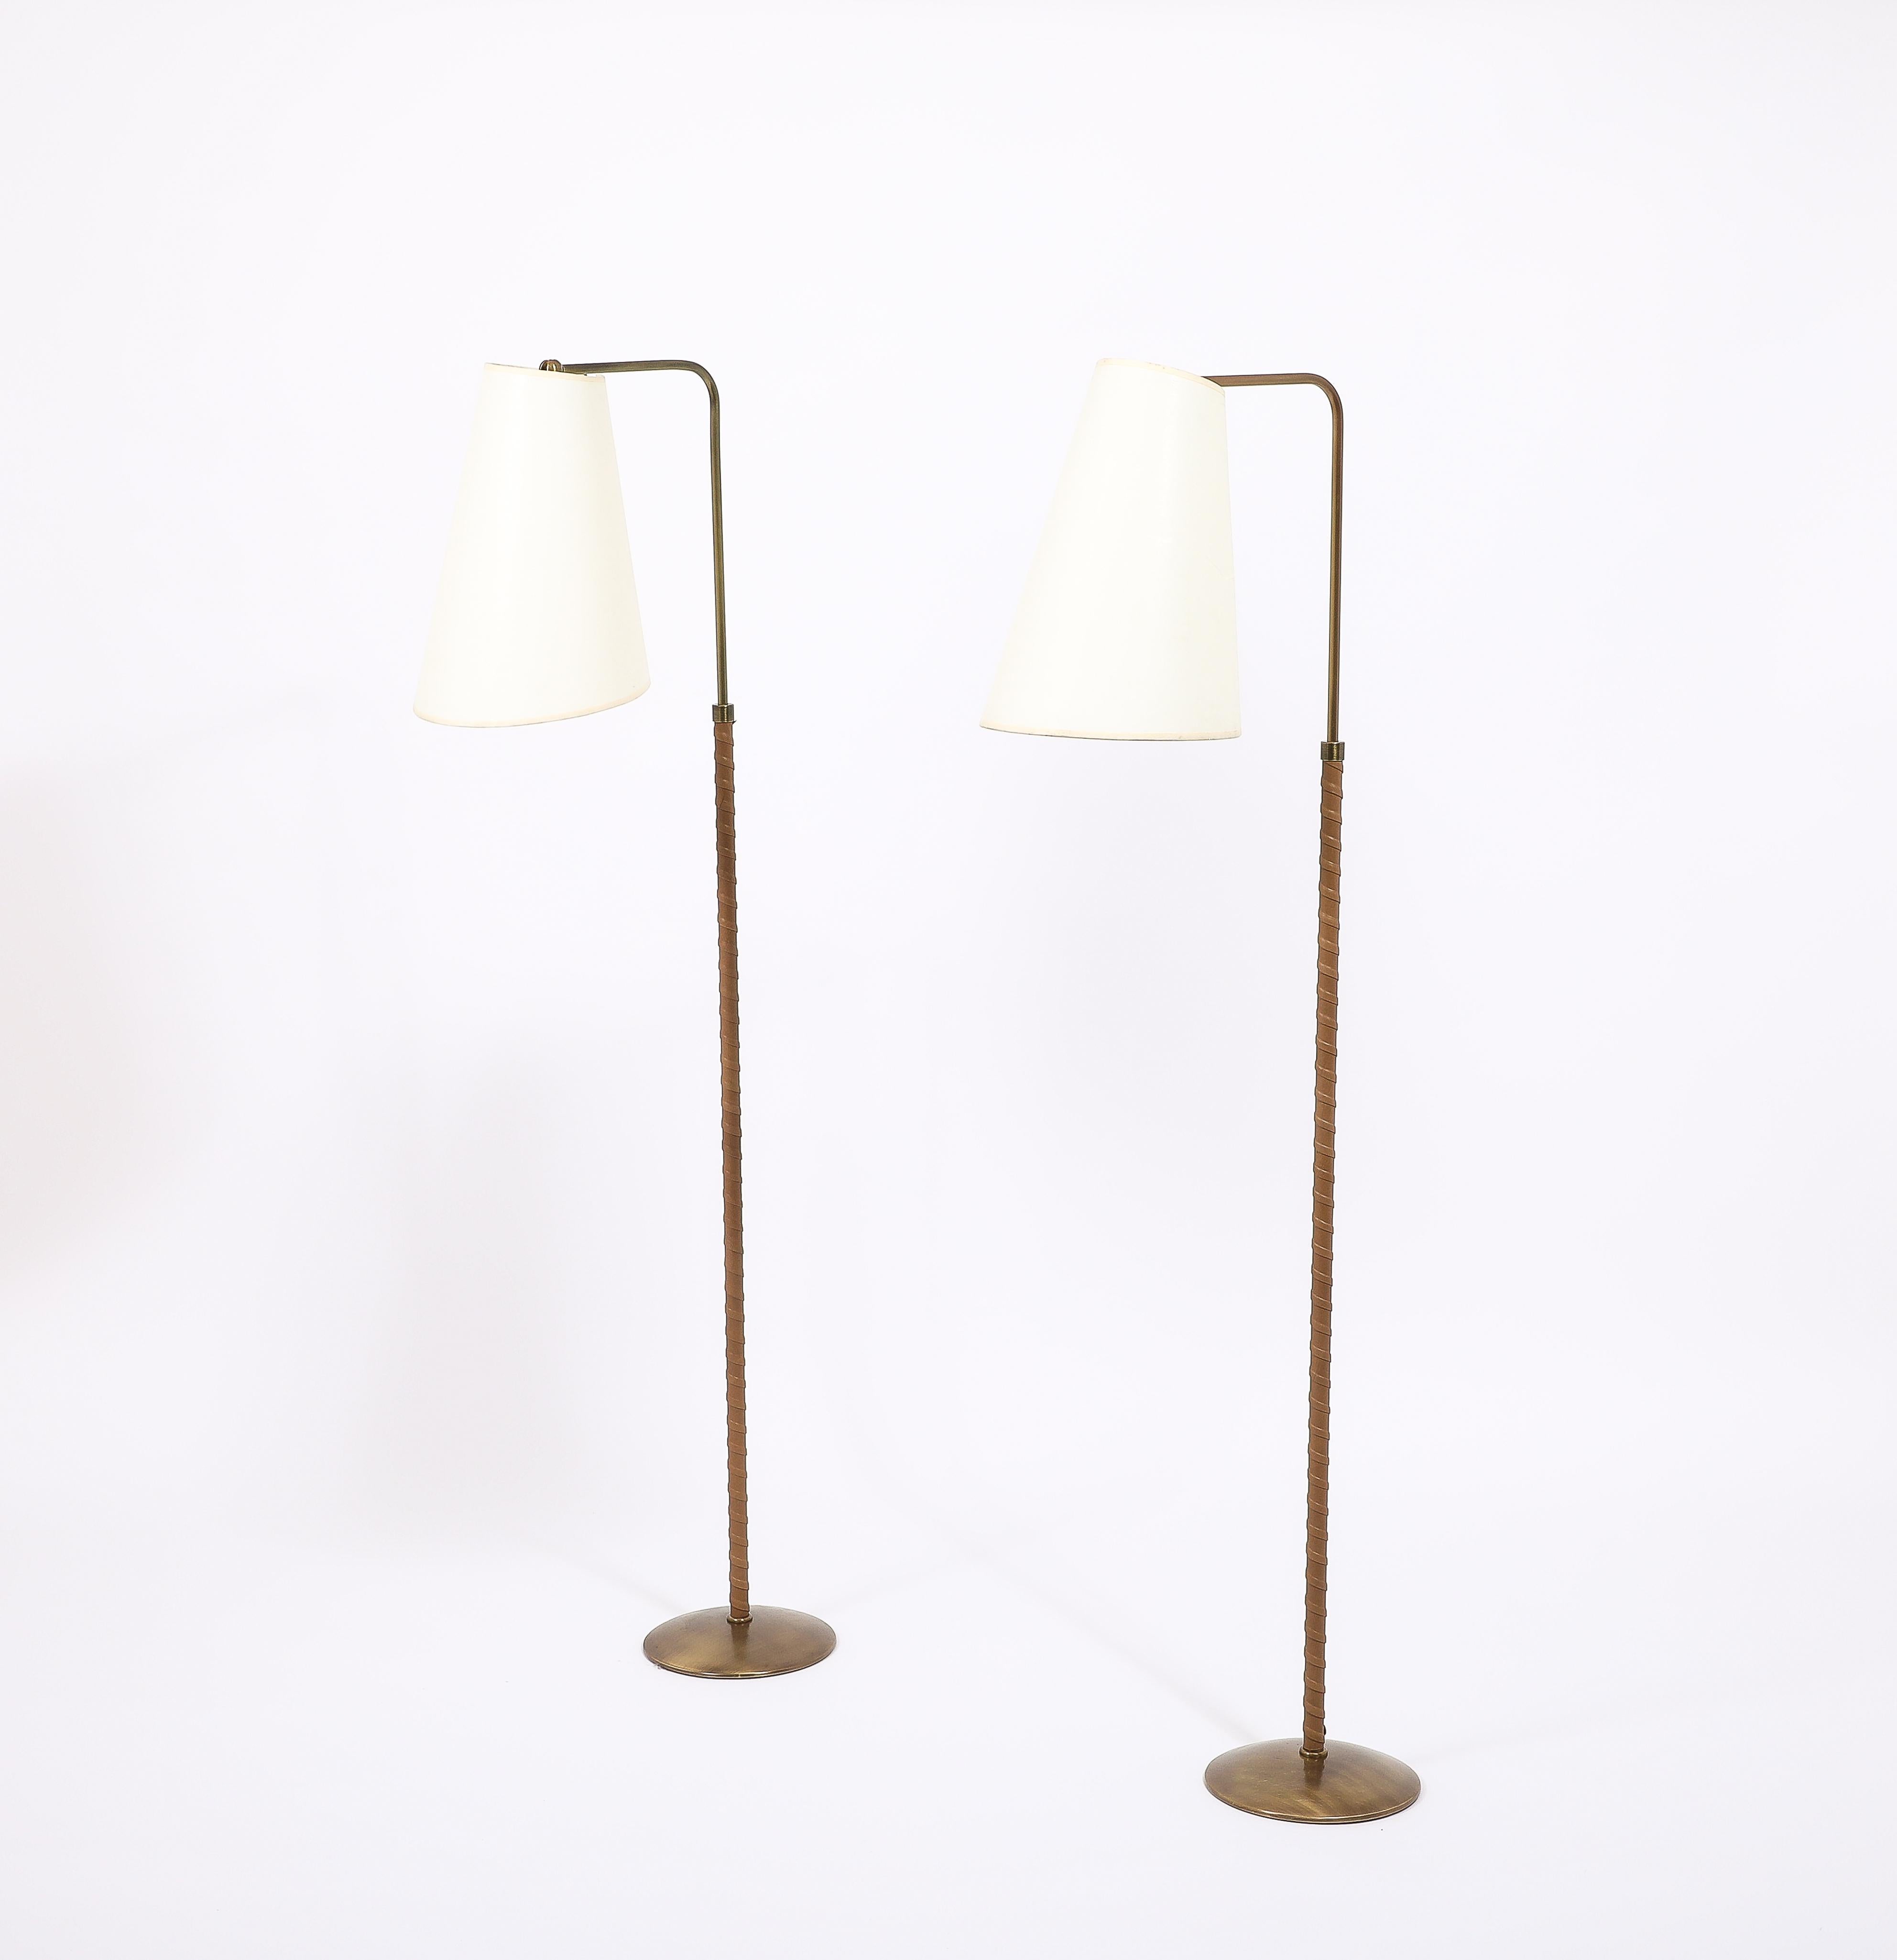 French Brass & Tan Leather Metalarte Floor Lamps, Spain 1960's For Sale